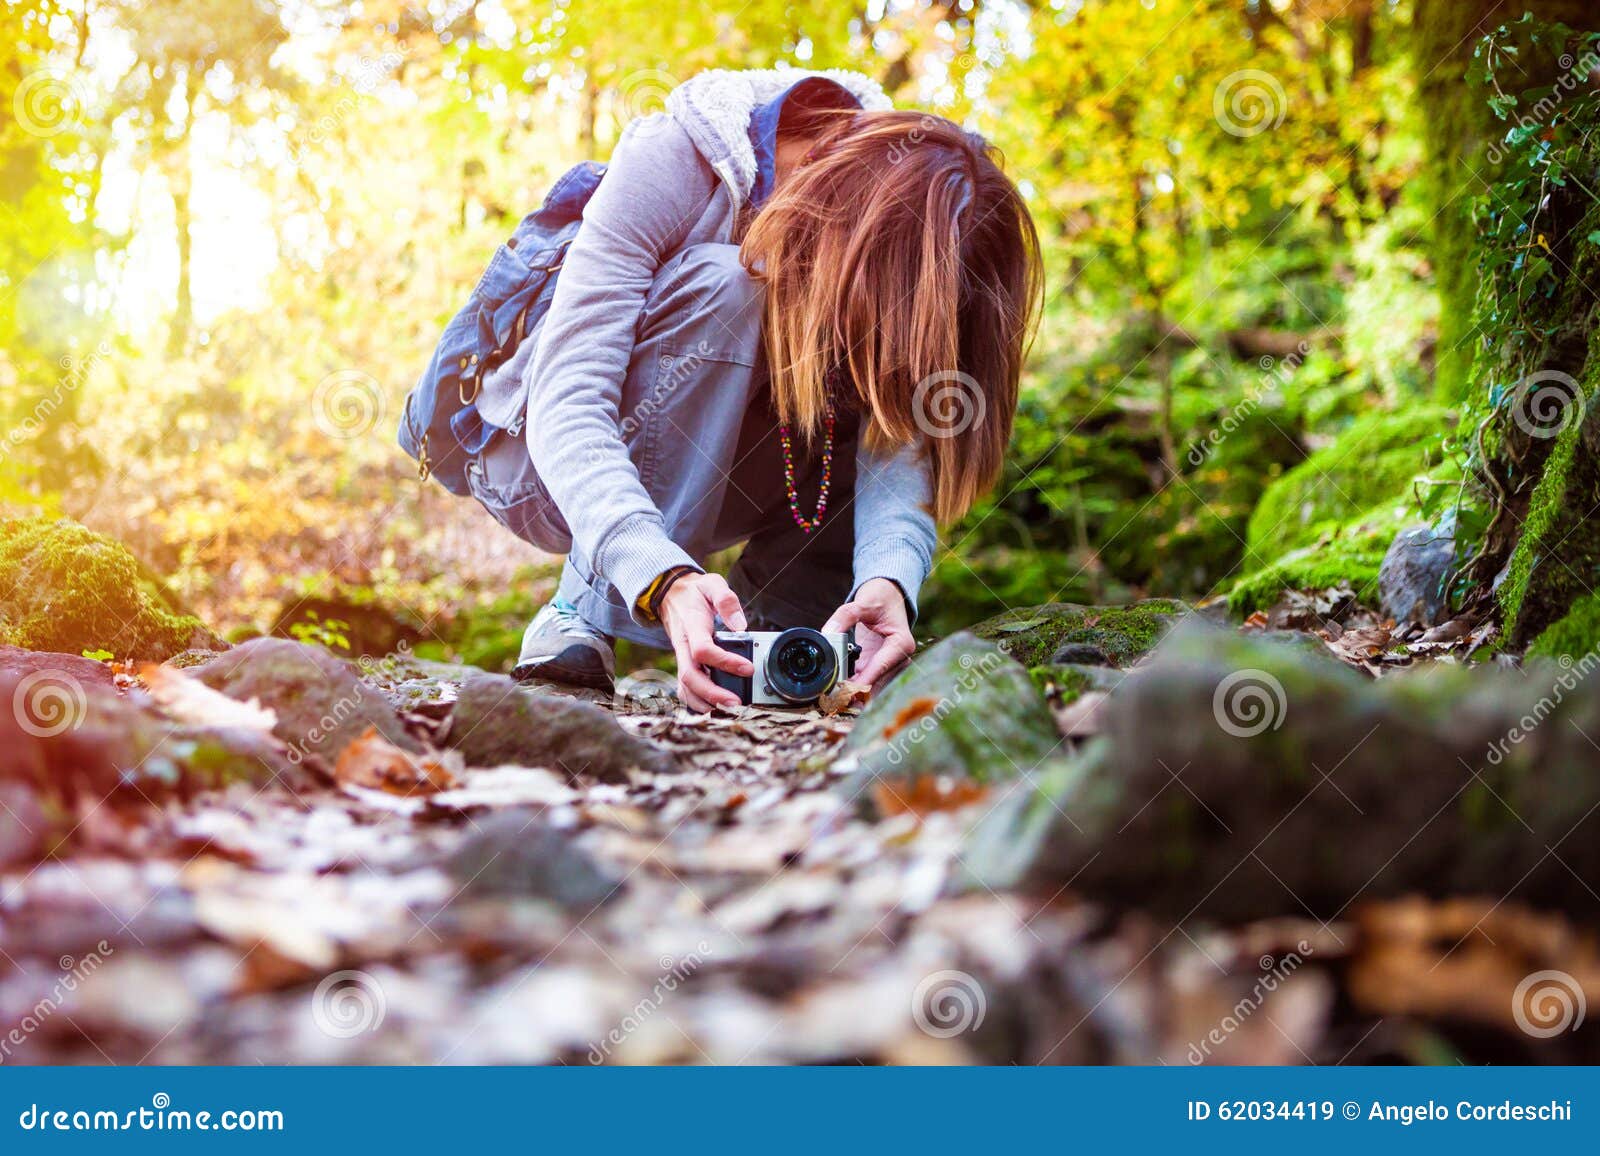 nature photography. photographer woman in the forest woods.